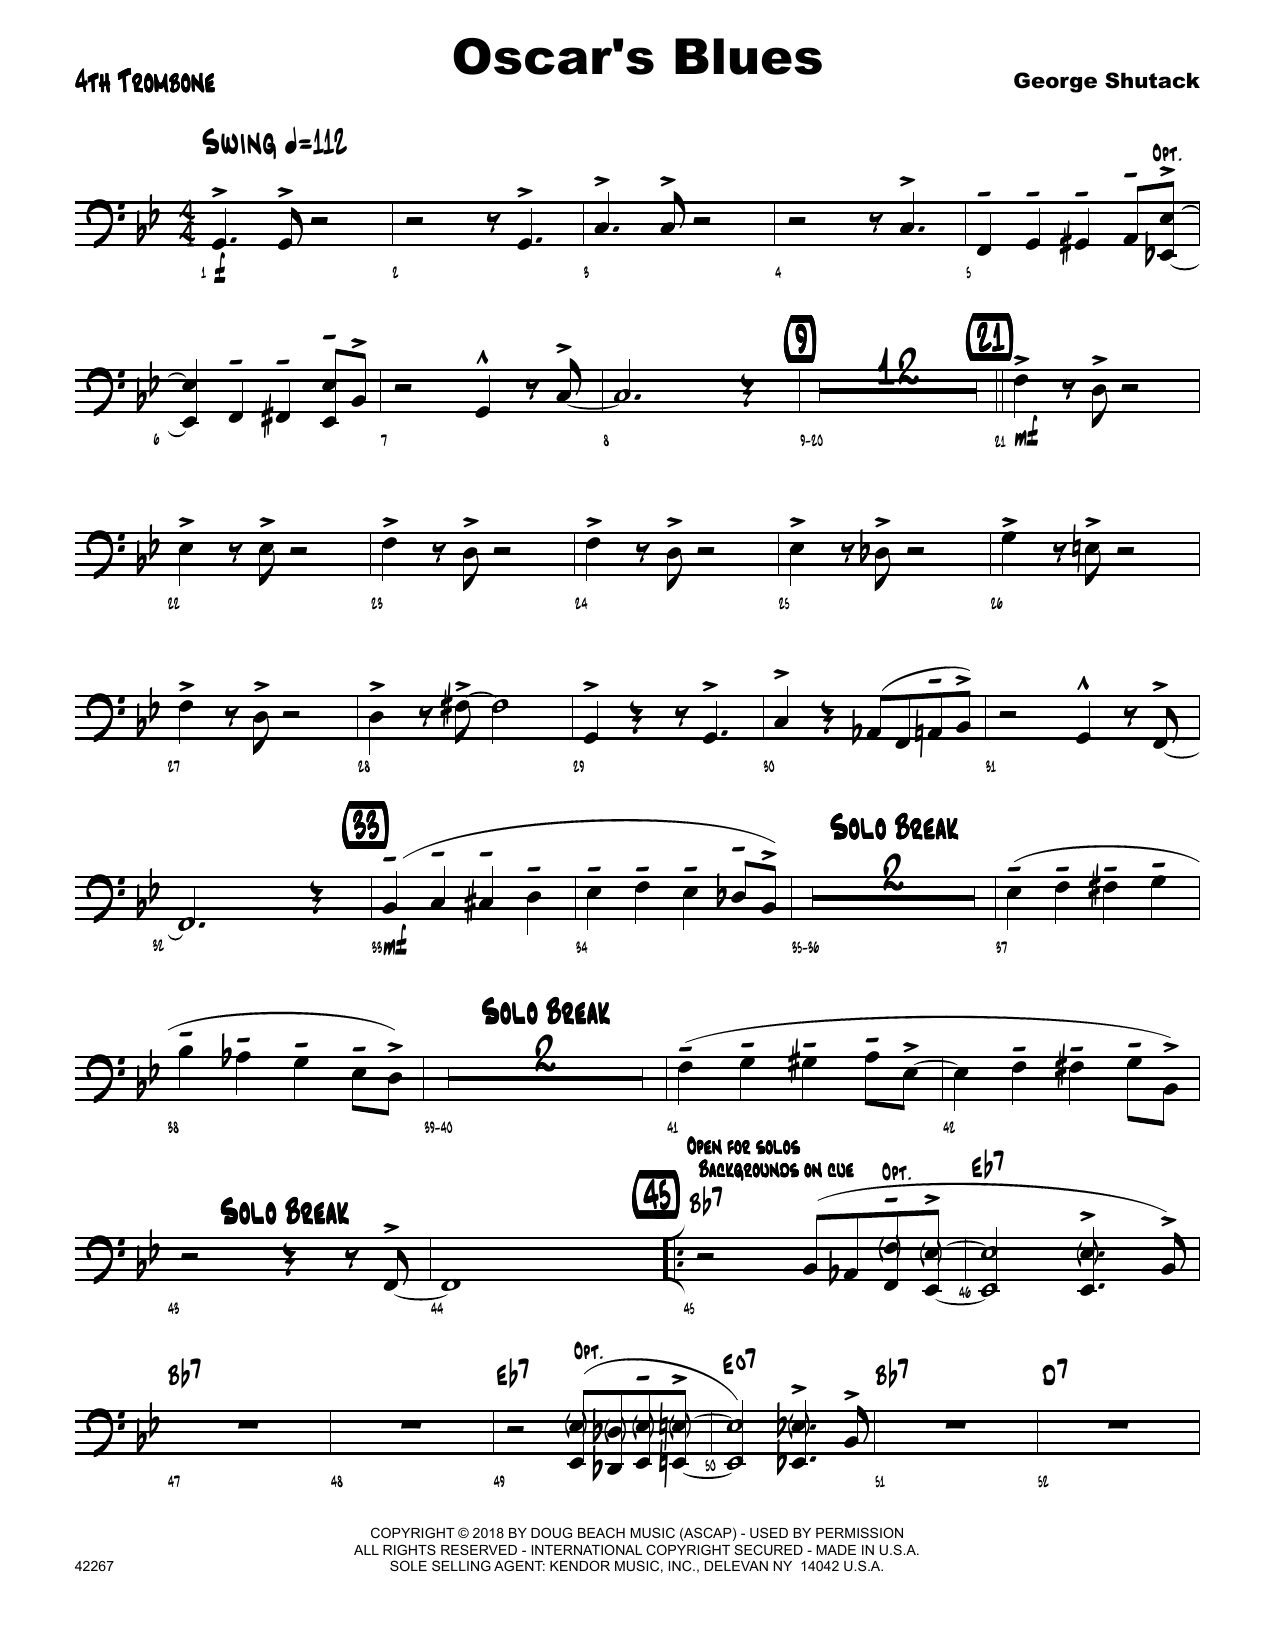 George Shutack Oscar's Blues - 4th Trombone sheet music preview music notes and score for Jazz Ensemble including 2 page(s)